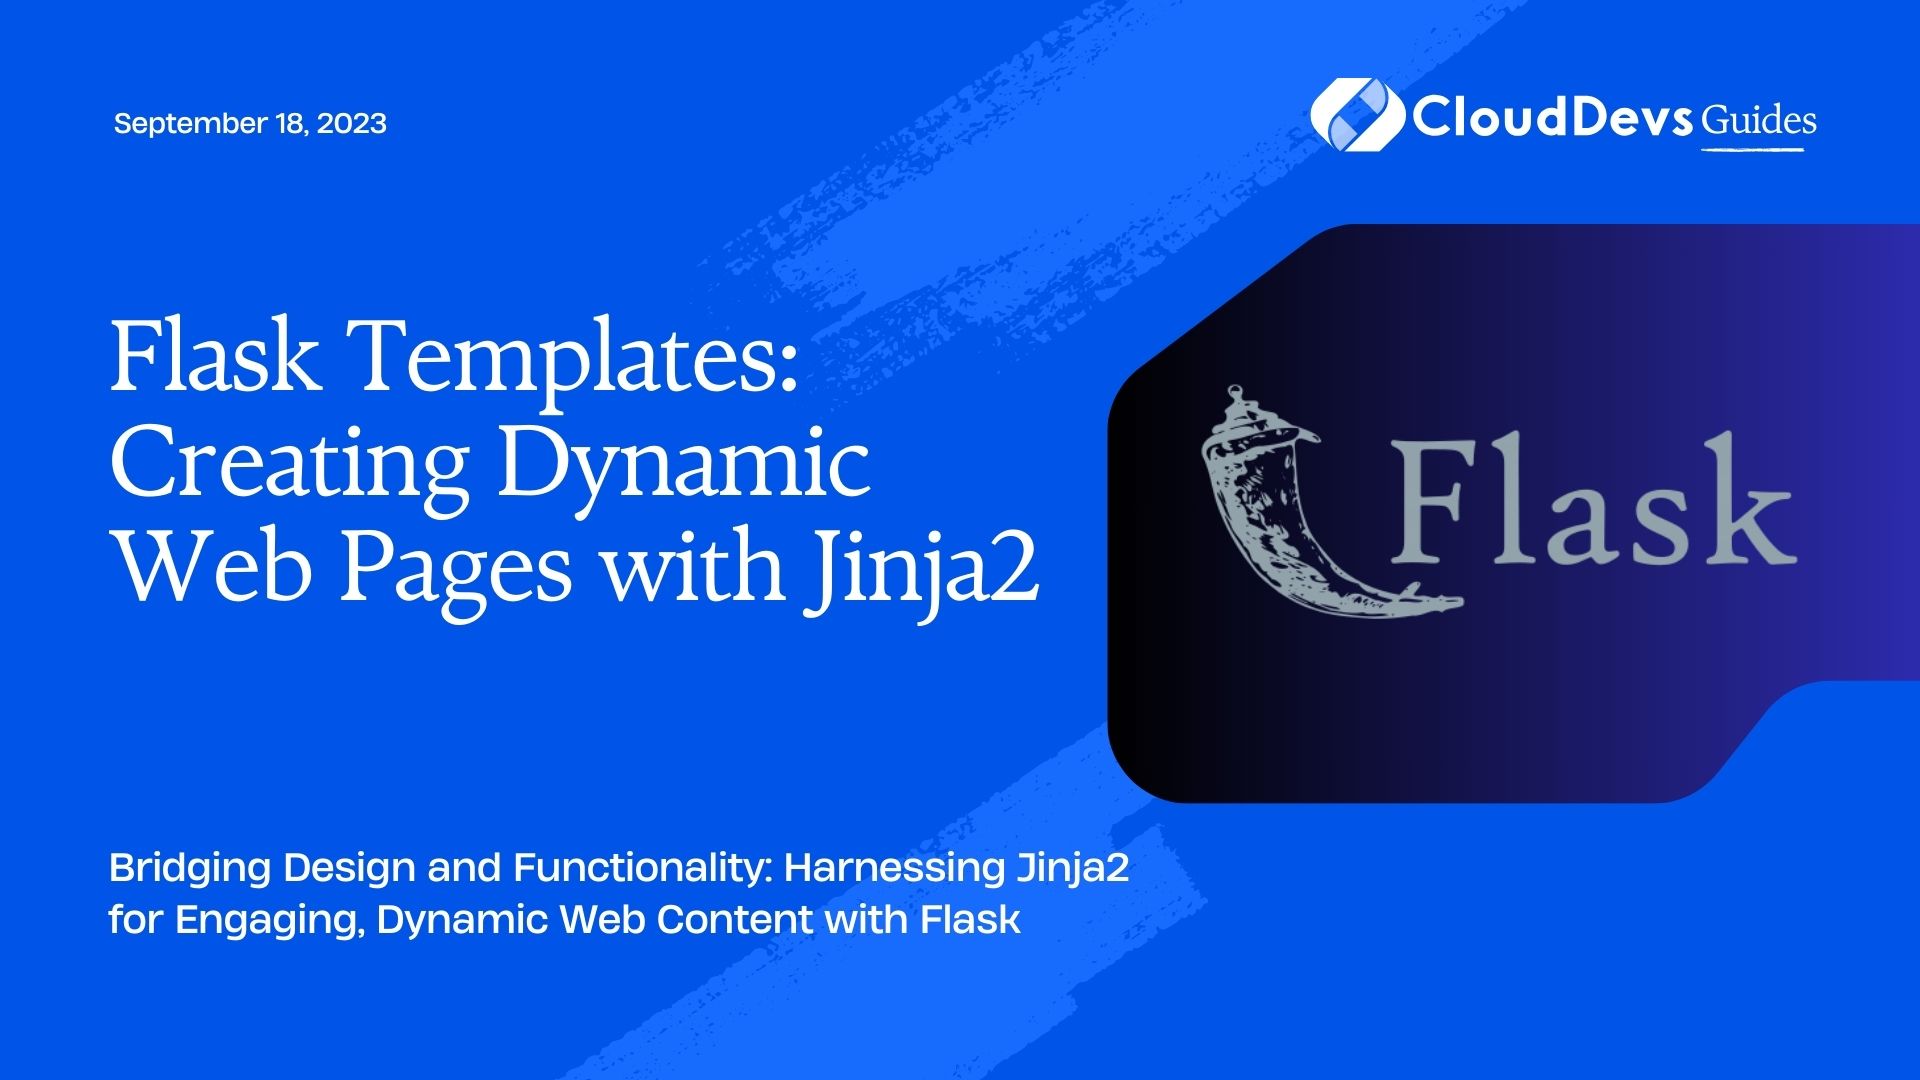 Flask Templates: Creating Dynamic Web Pages with Jinja2